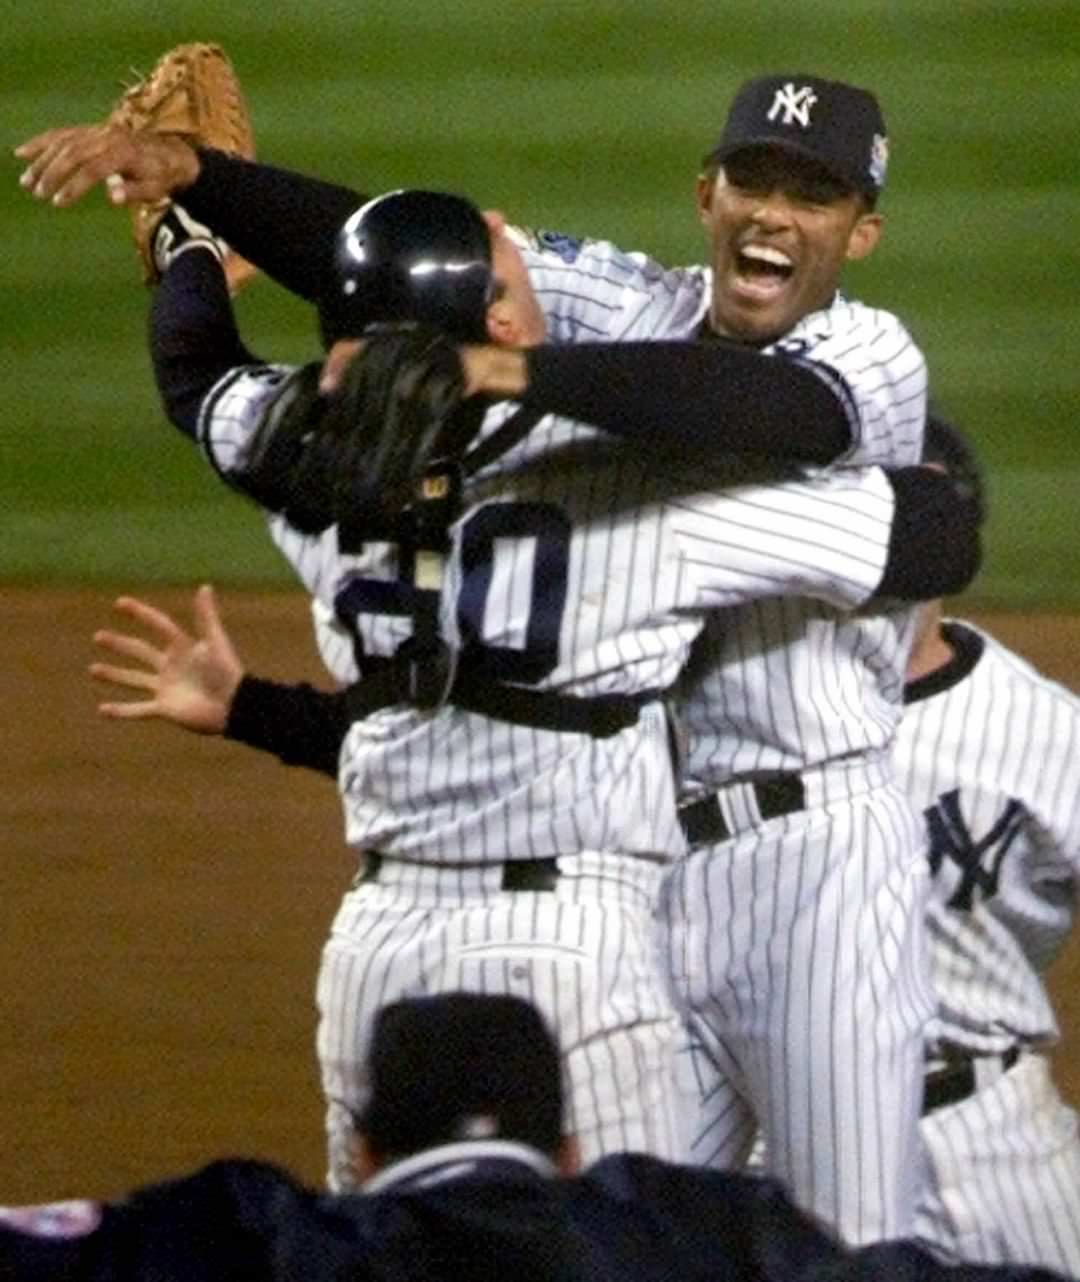 New York Yankees Pitcher Mariano Rivera Jumps Into Catcher Jorge Posada'S Arms After Defeating The Atlanta Braves In Game 4 Of The World Series, 1999.